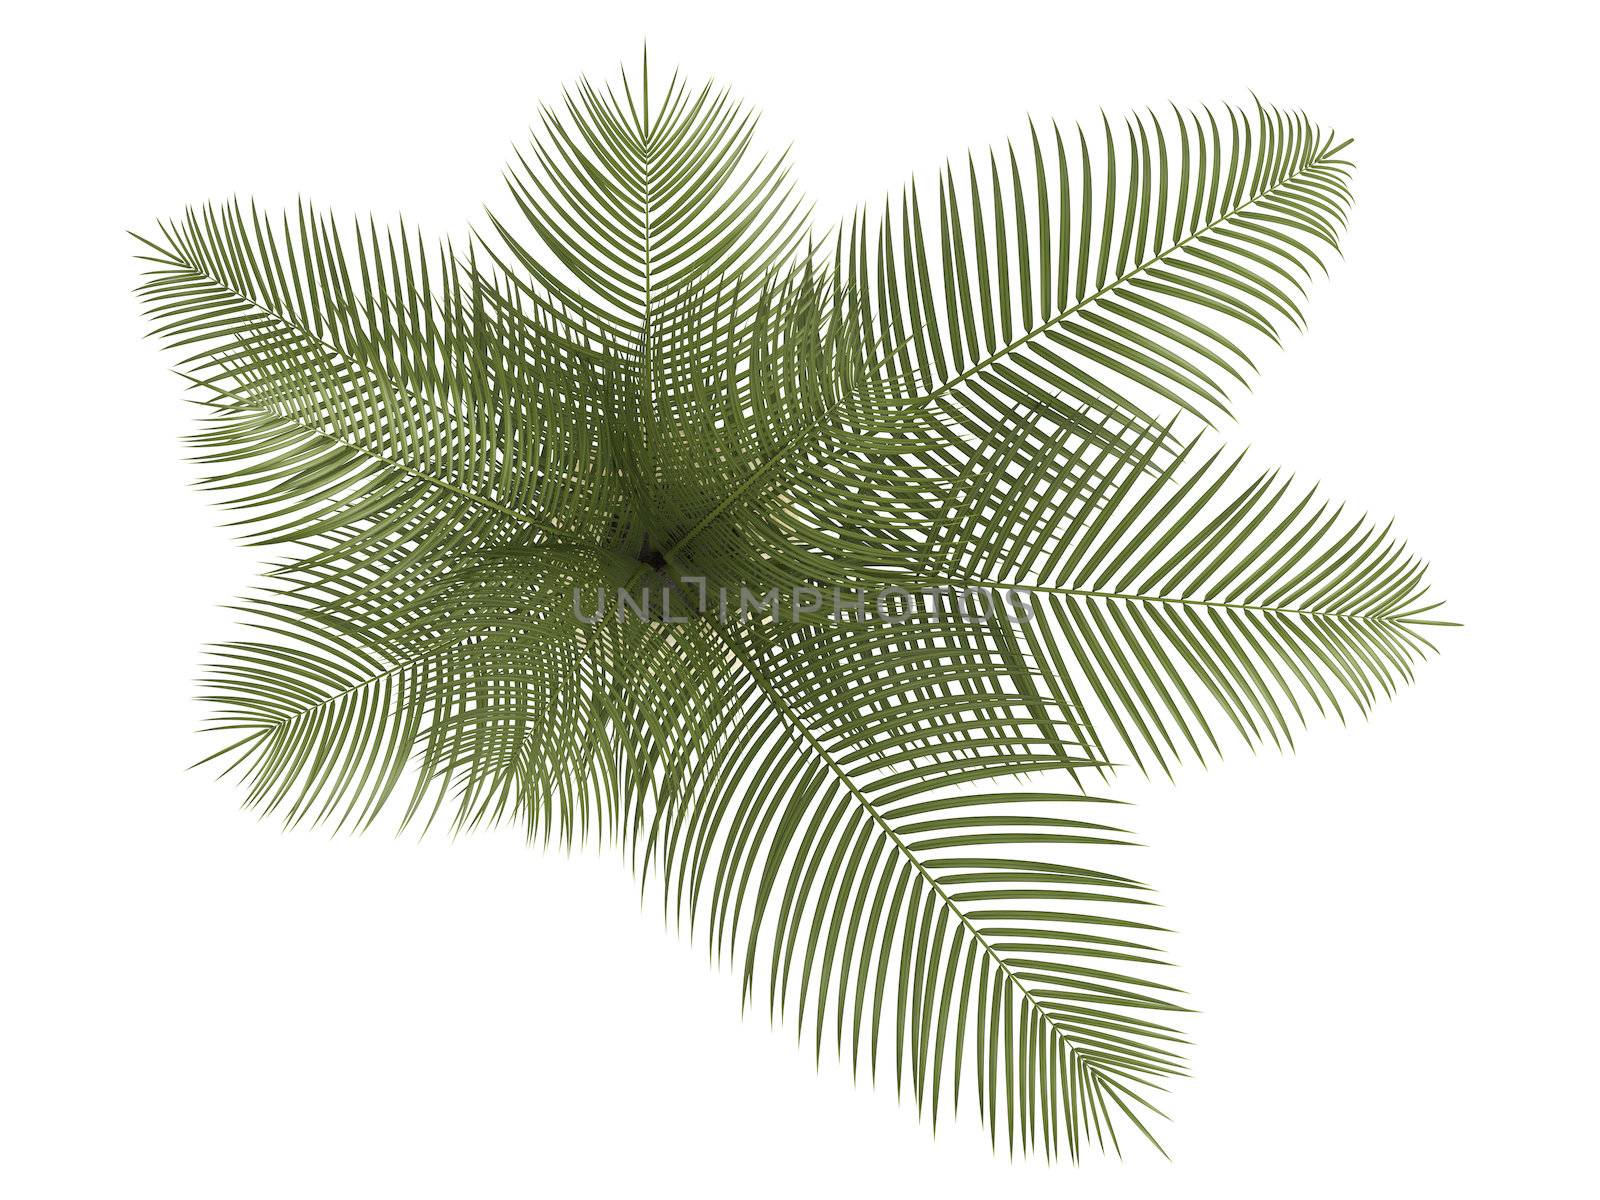 Areca palm houseplant with multiple fronds growing in a small ceramic container isolated on white